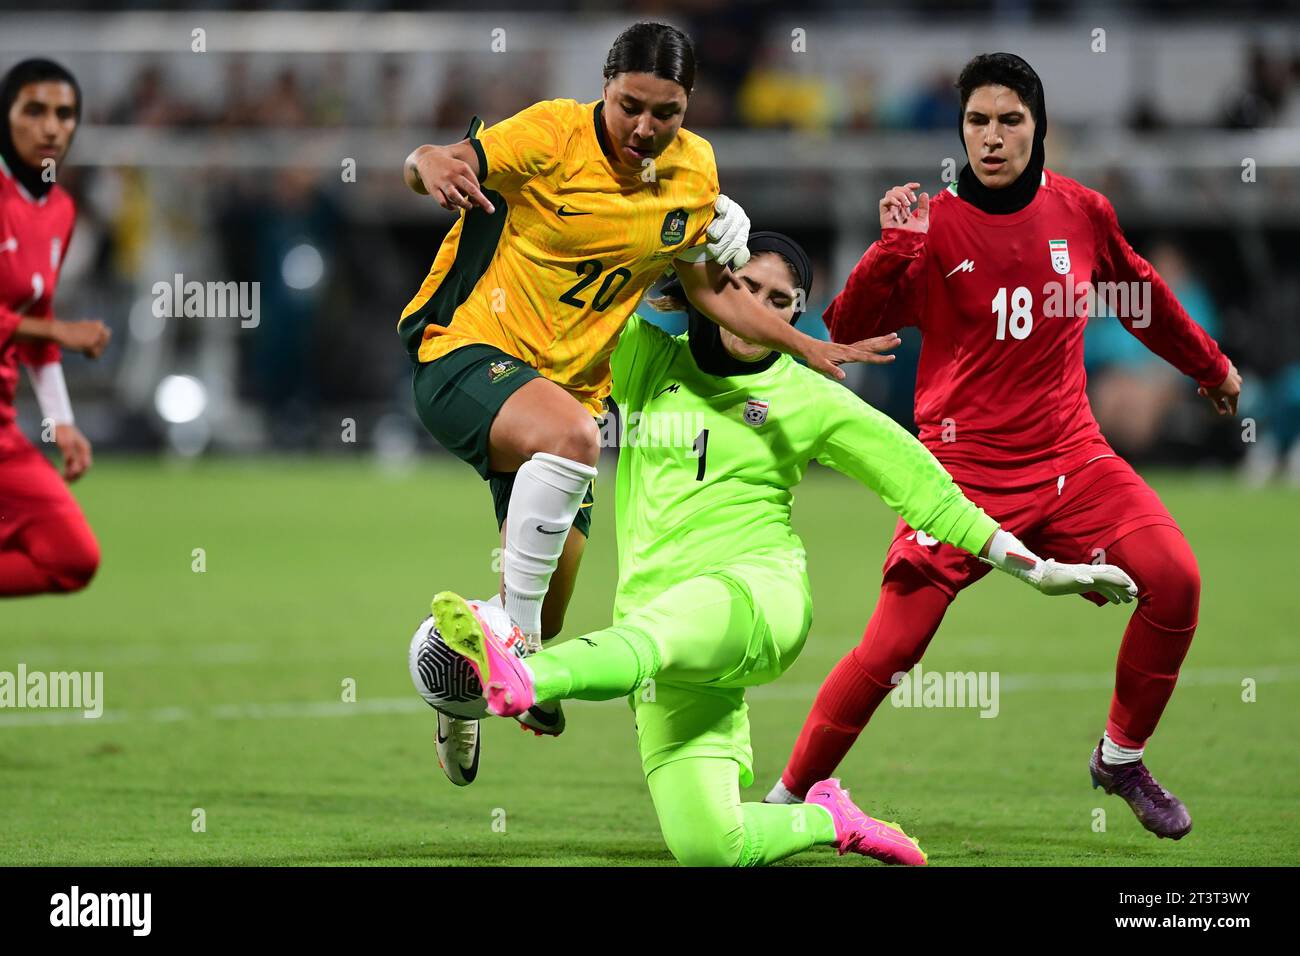 Perth, Australia. 26th Oct, 2023. Samantha May Kerr (L) of the Australia women's football team and Zahra Khajavi (M), Melika Mohammadi (R) of the Islamic Republic of Iran women's football team are seen in action during the 2024 AFC Women's football Olympic Qualifying Round 2 Group A match between Australia and Islamic Republic of Iran held at the Perth Rectangular Stadium. Final score Australia 2:0 Islamic Republic of Iran. Credit: SOPA Images Limited/Alamy Live News Stock Photo